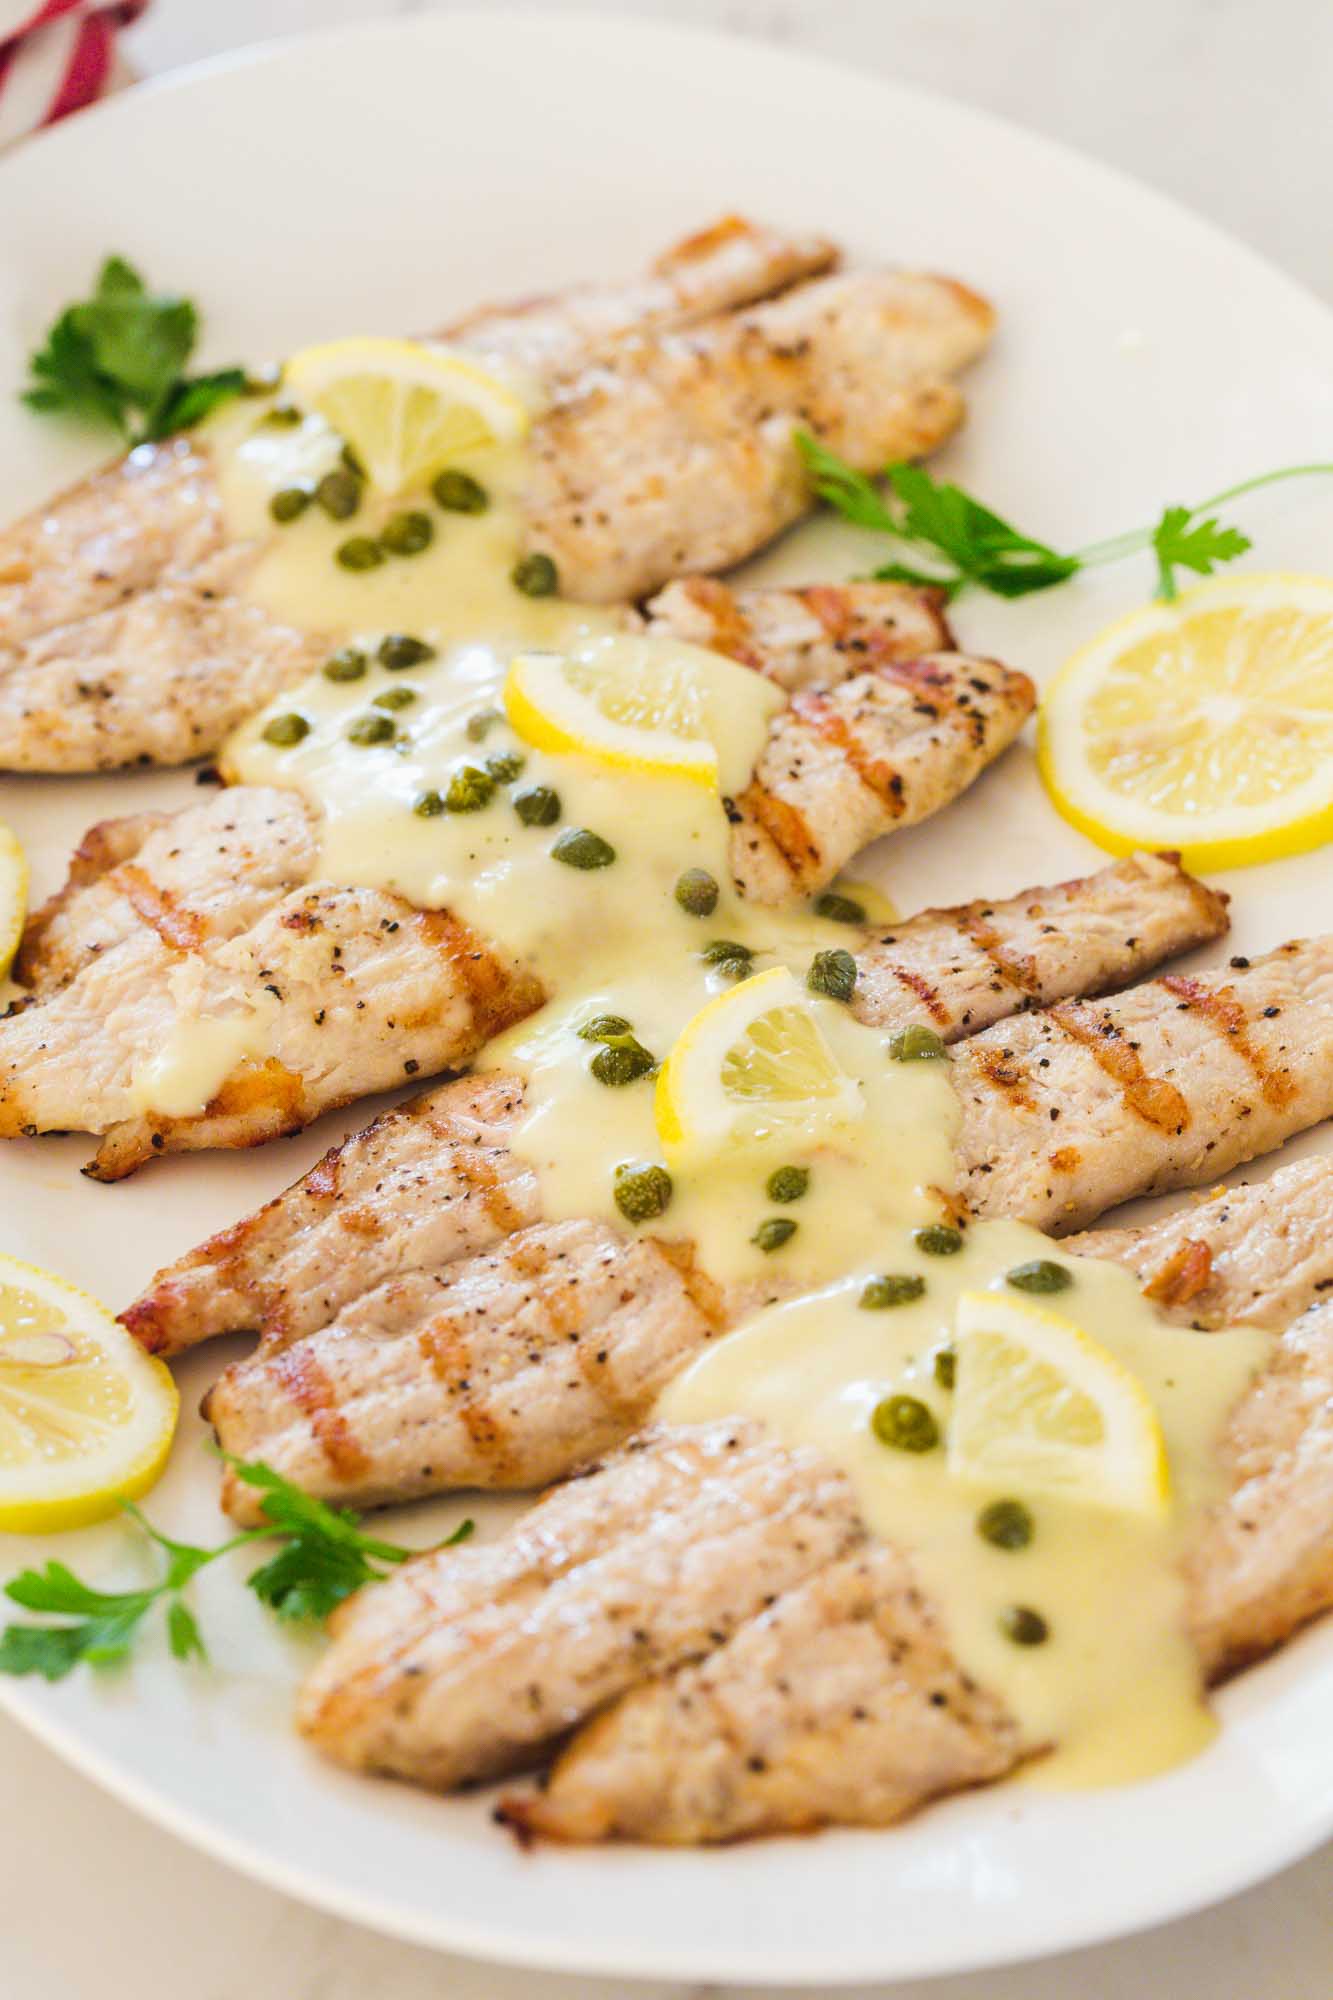 Grilled tilapia served on a platter, and topped with piccata sauce, capers and fresh lemon slices.